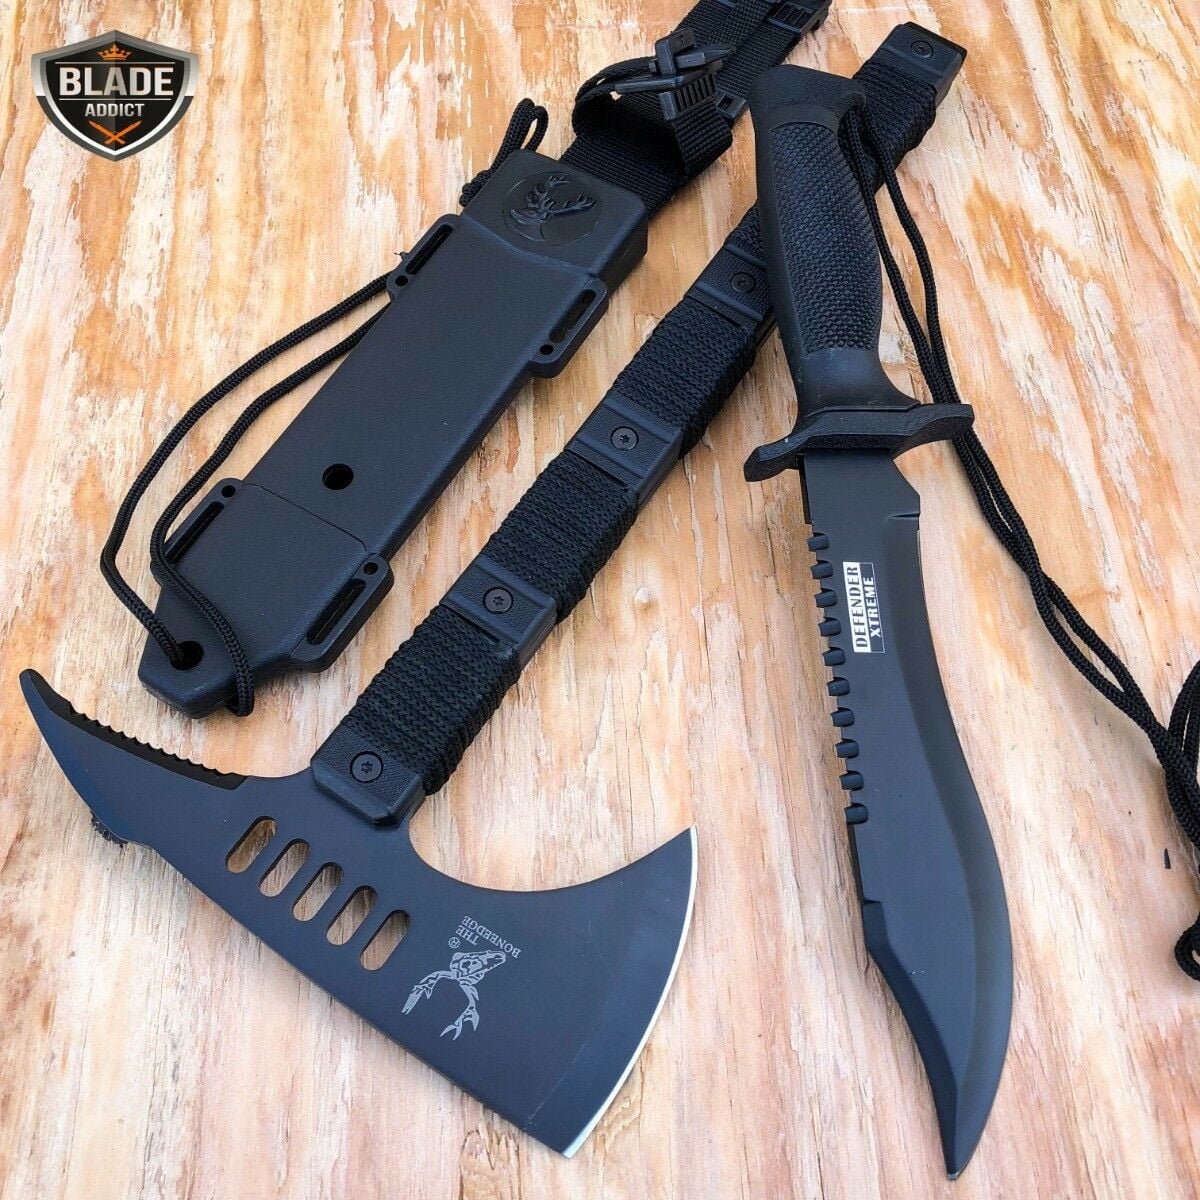 Outdoor Camping Hiking Tactical Blade Axe Survival Rescue Functional Hand Tool 